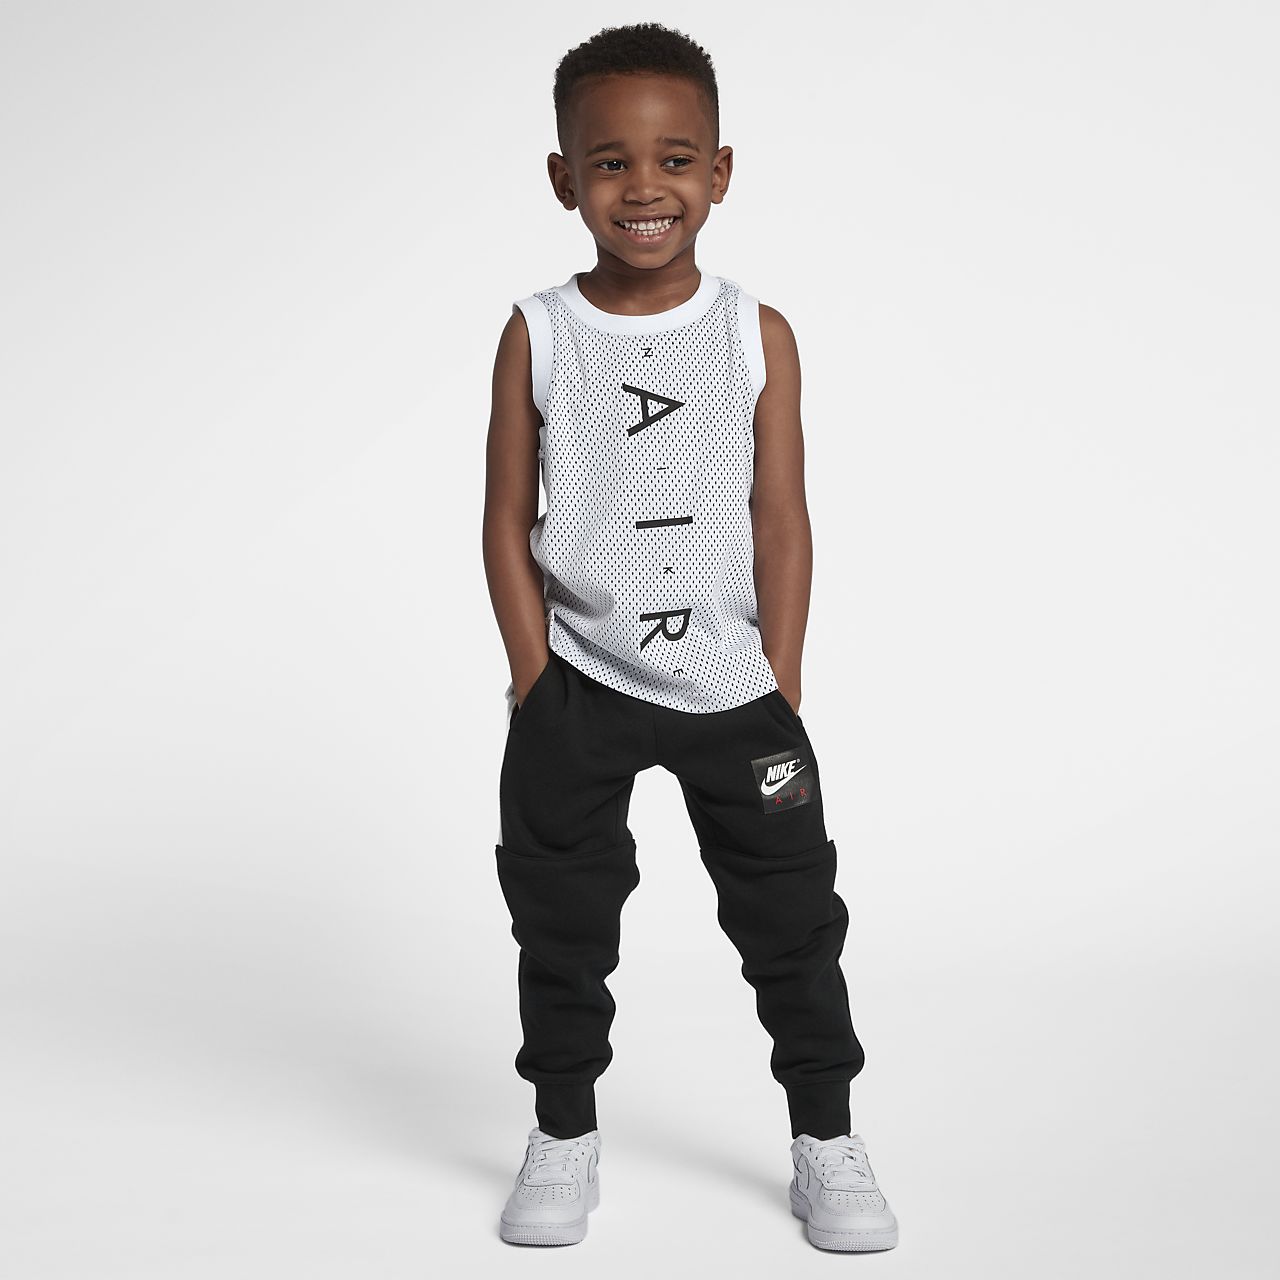 Does your 6-8 year old athletic boy wear tank tops?